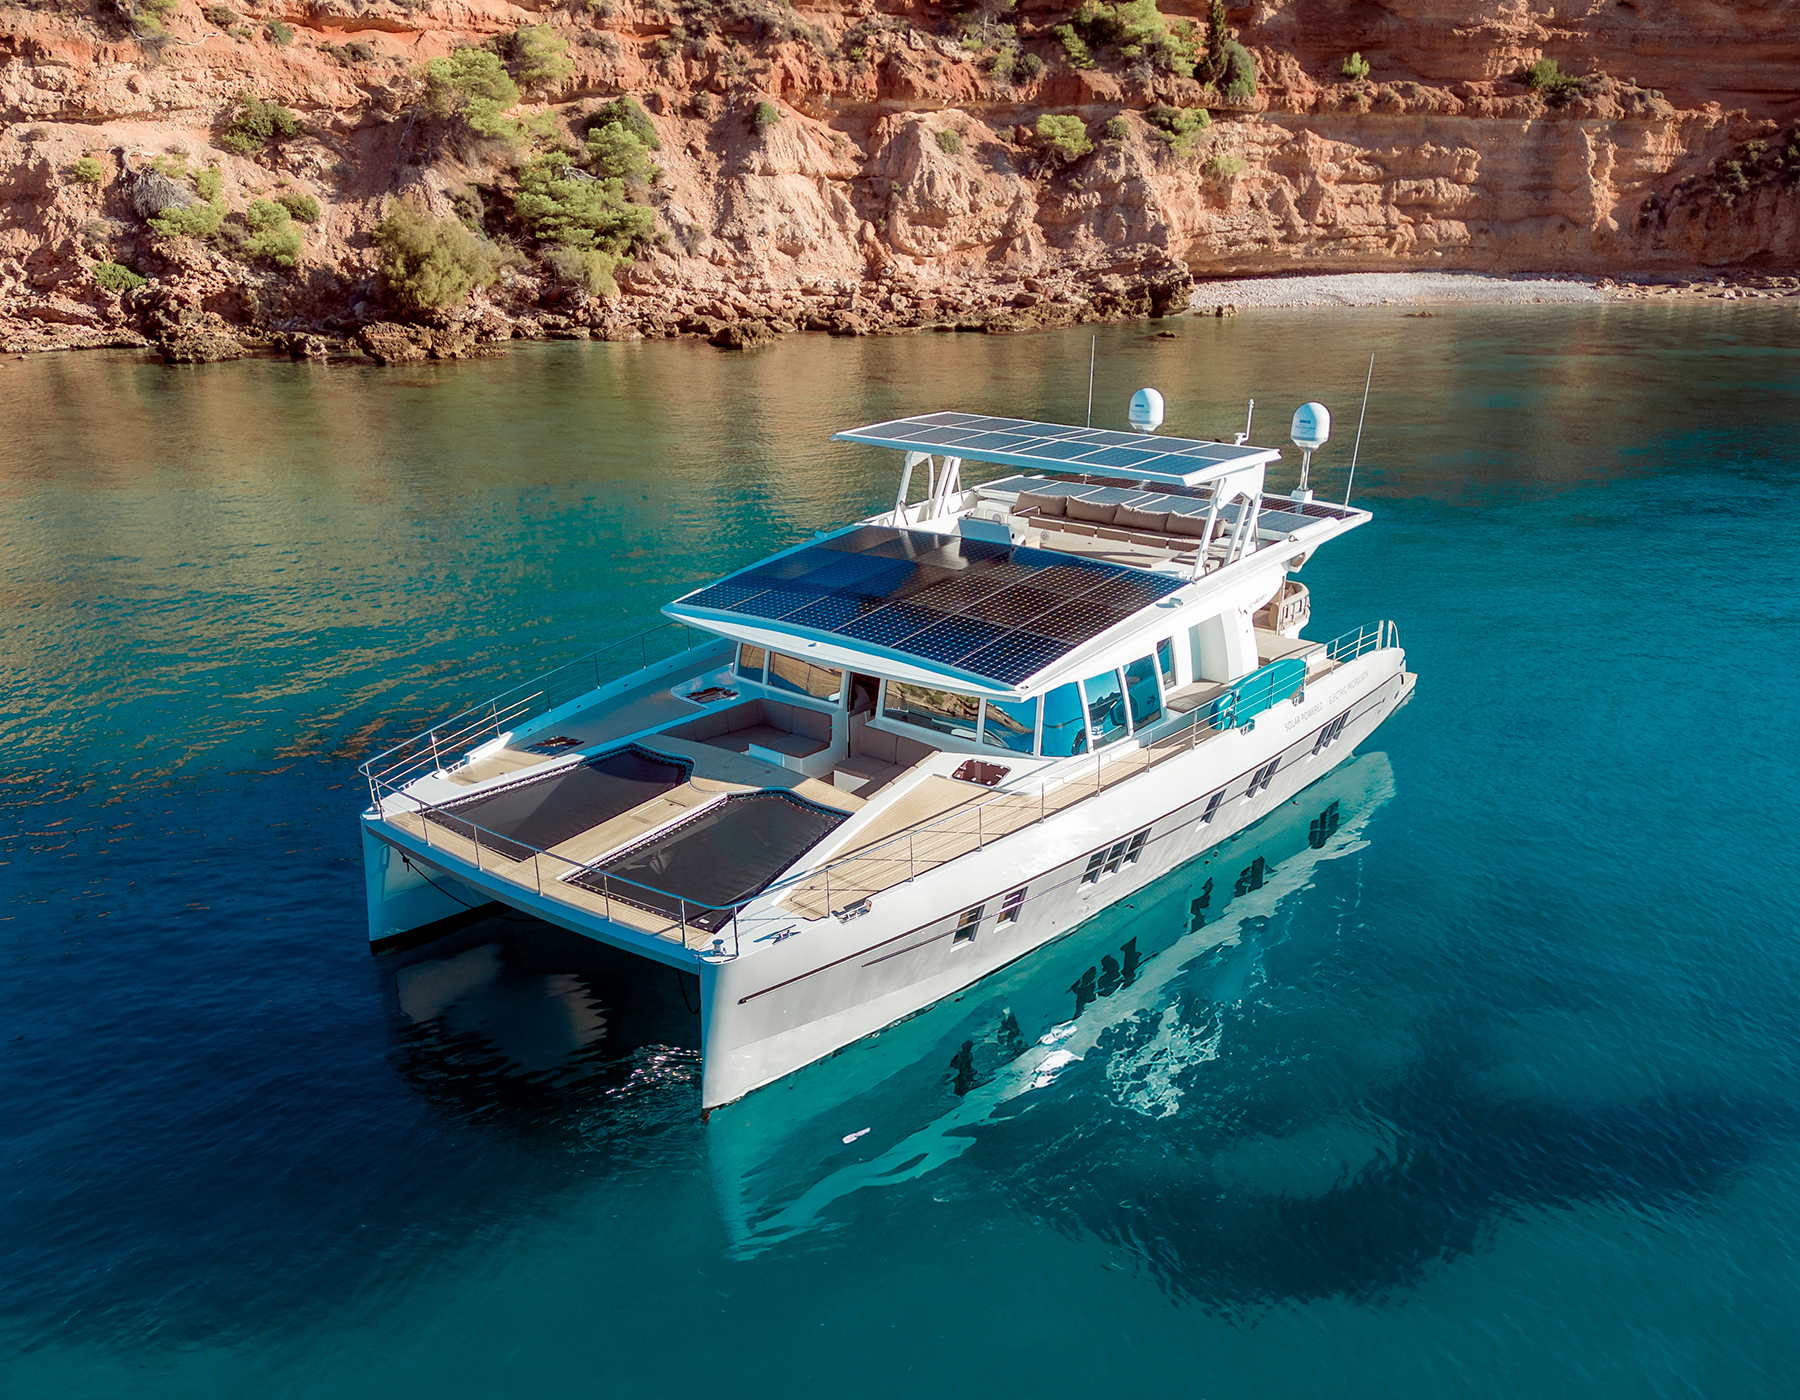 Silent yacht with solar panels on the roof in crystal clear water